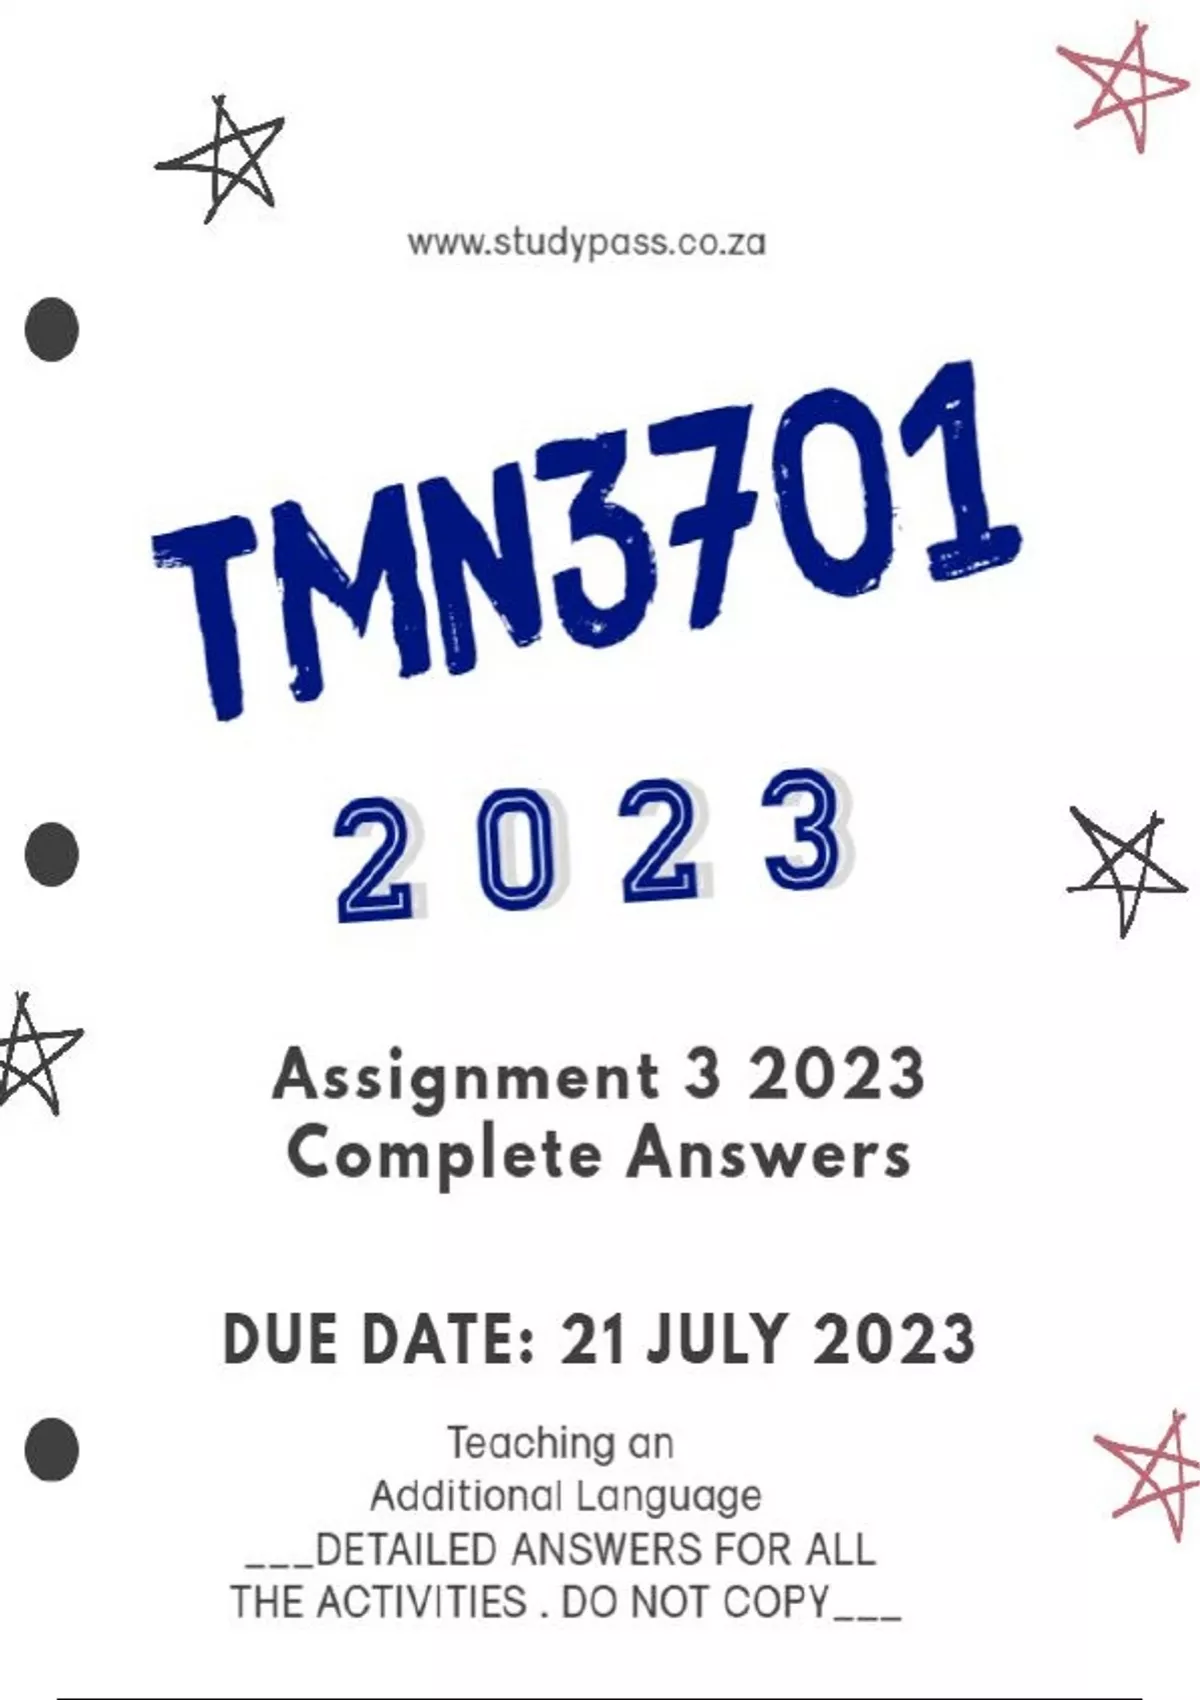 tmn3701 assignment 2 answers 2023